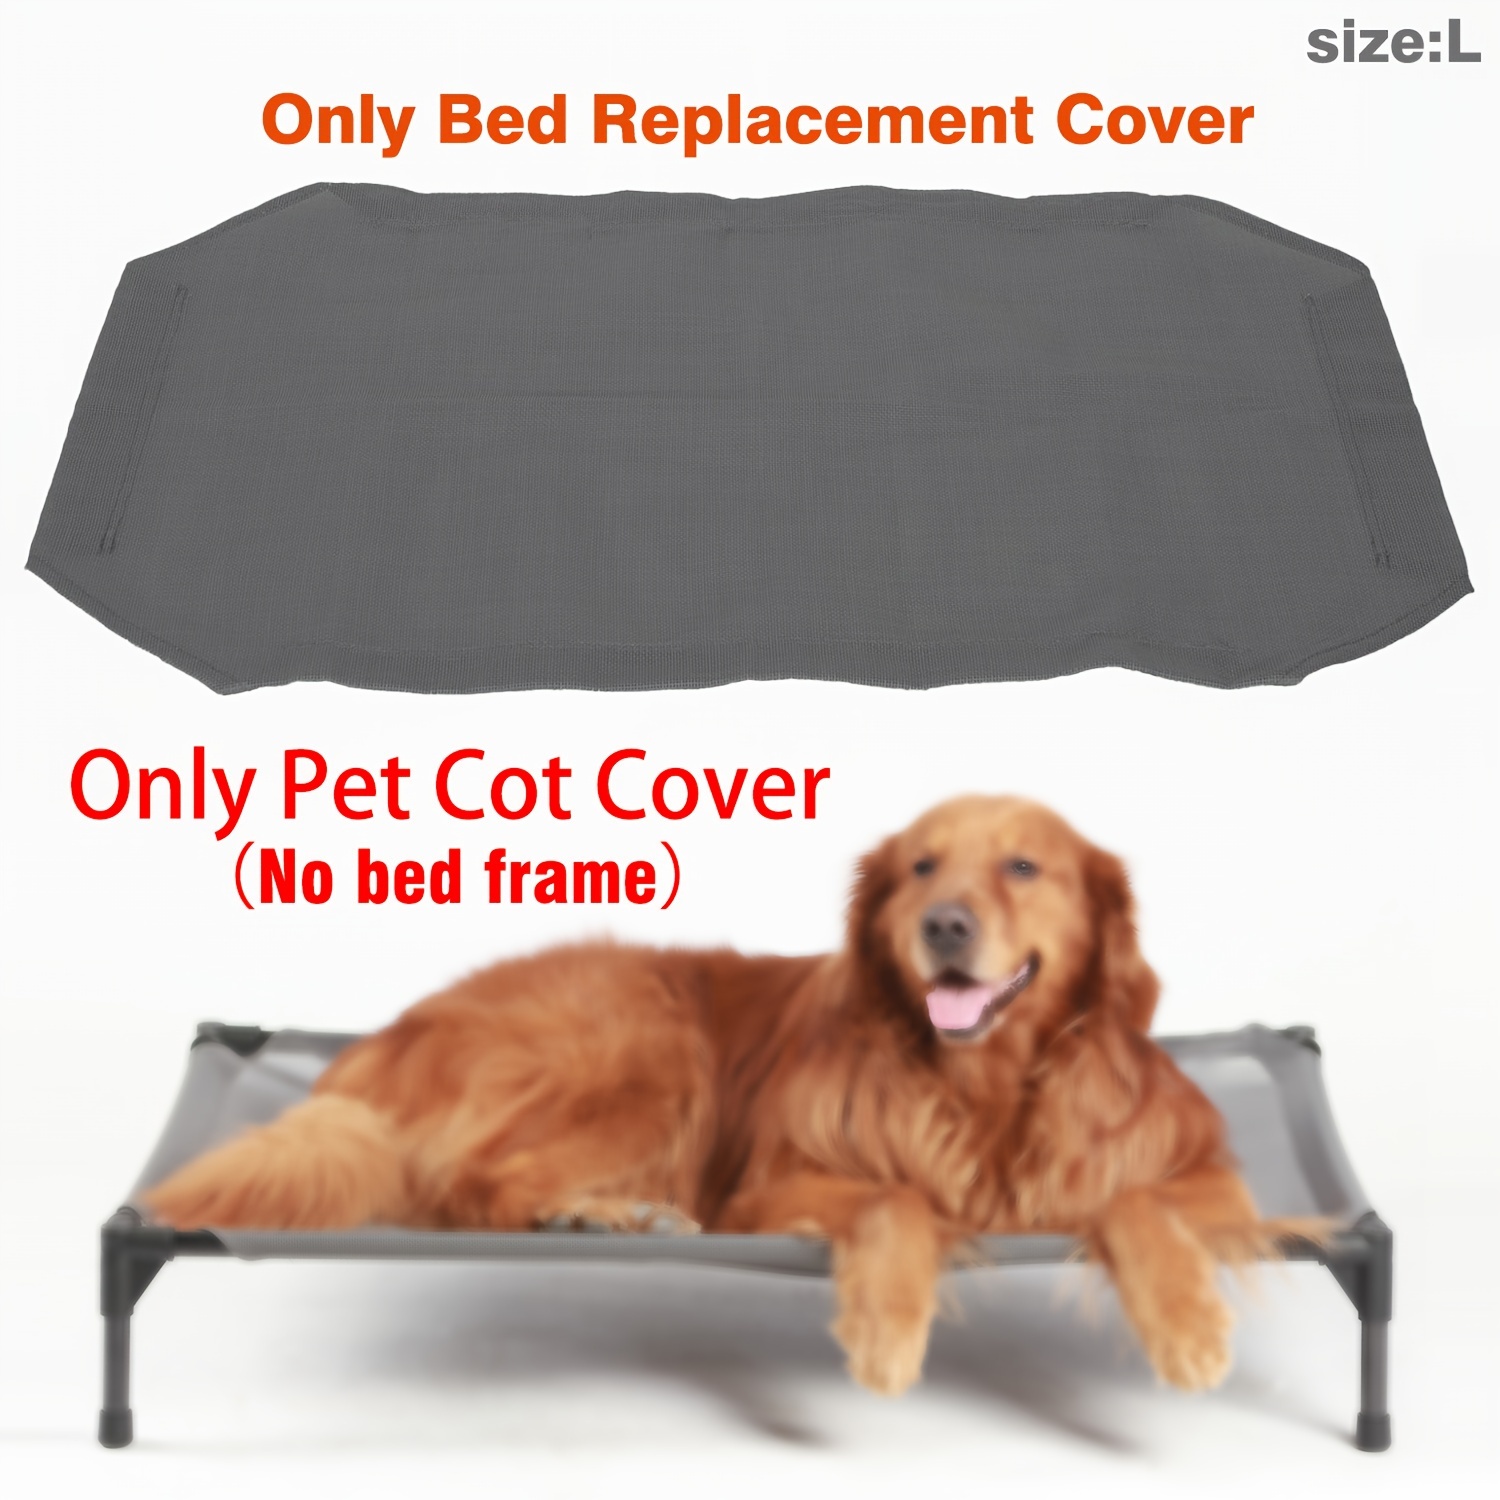 

Waterproof & Washable Elevated Dog Bed Replacement Net - Portable, Durable Pvc Mesh Cover For All Breeds, Outdoor Use - Gray, Sizes 42"x30", 32"x25", 22"x17" (frame Not Included)